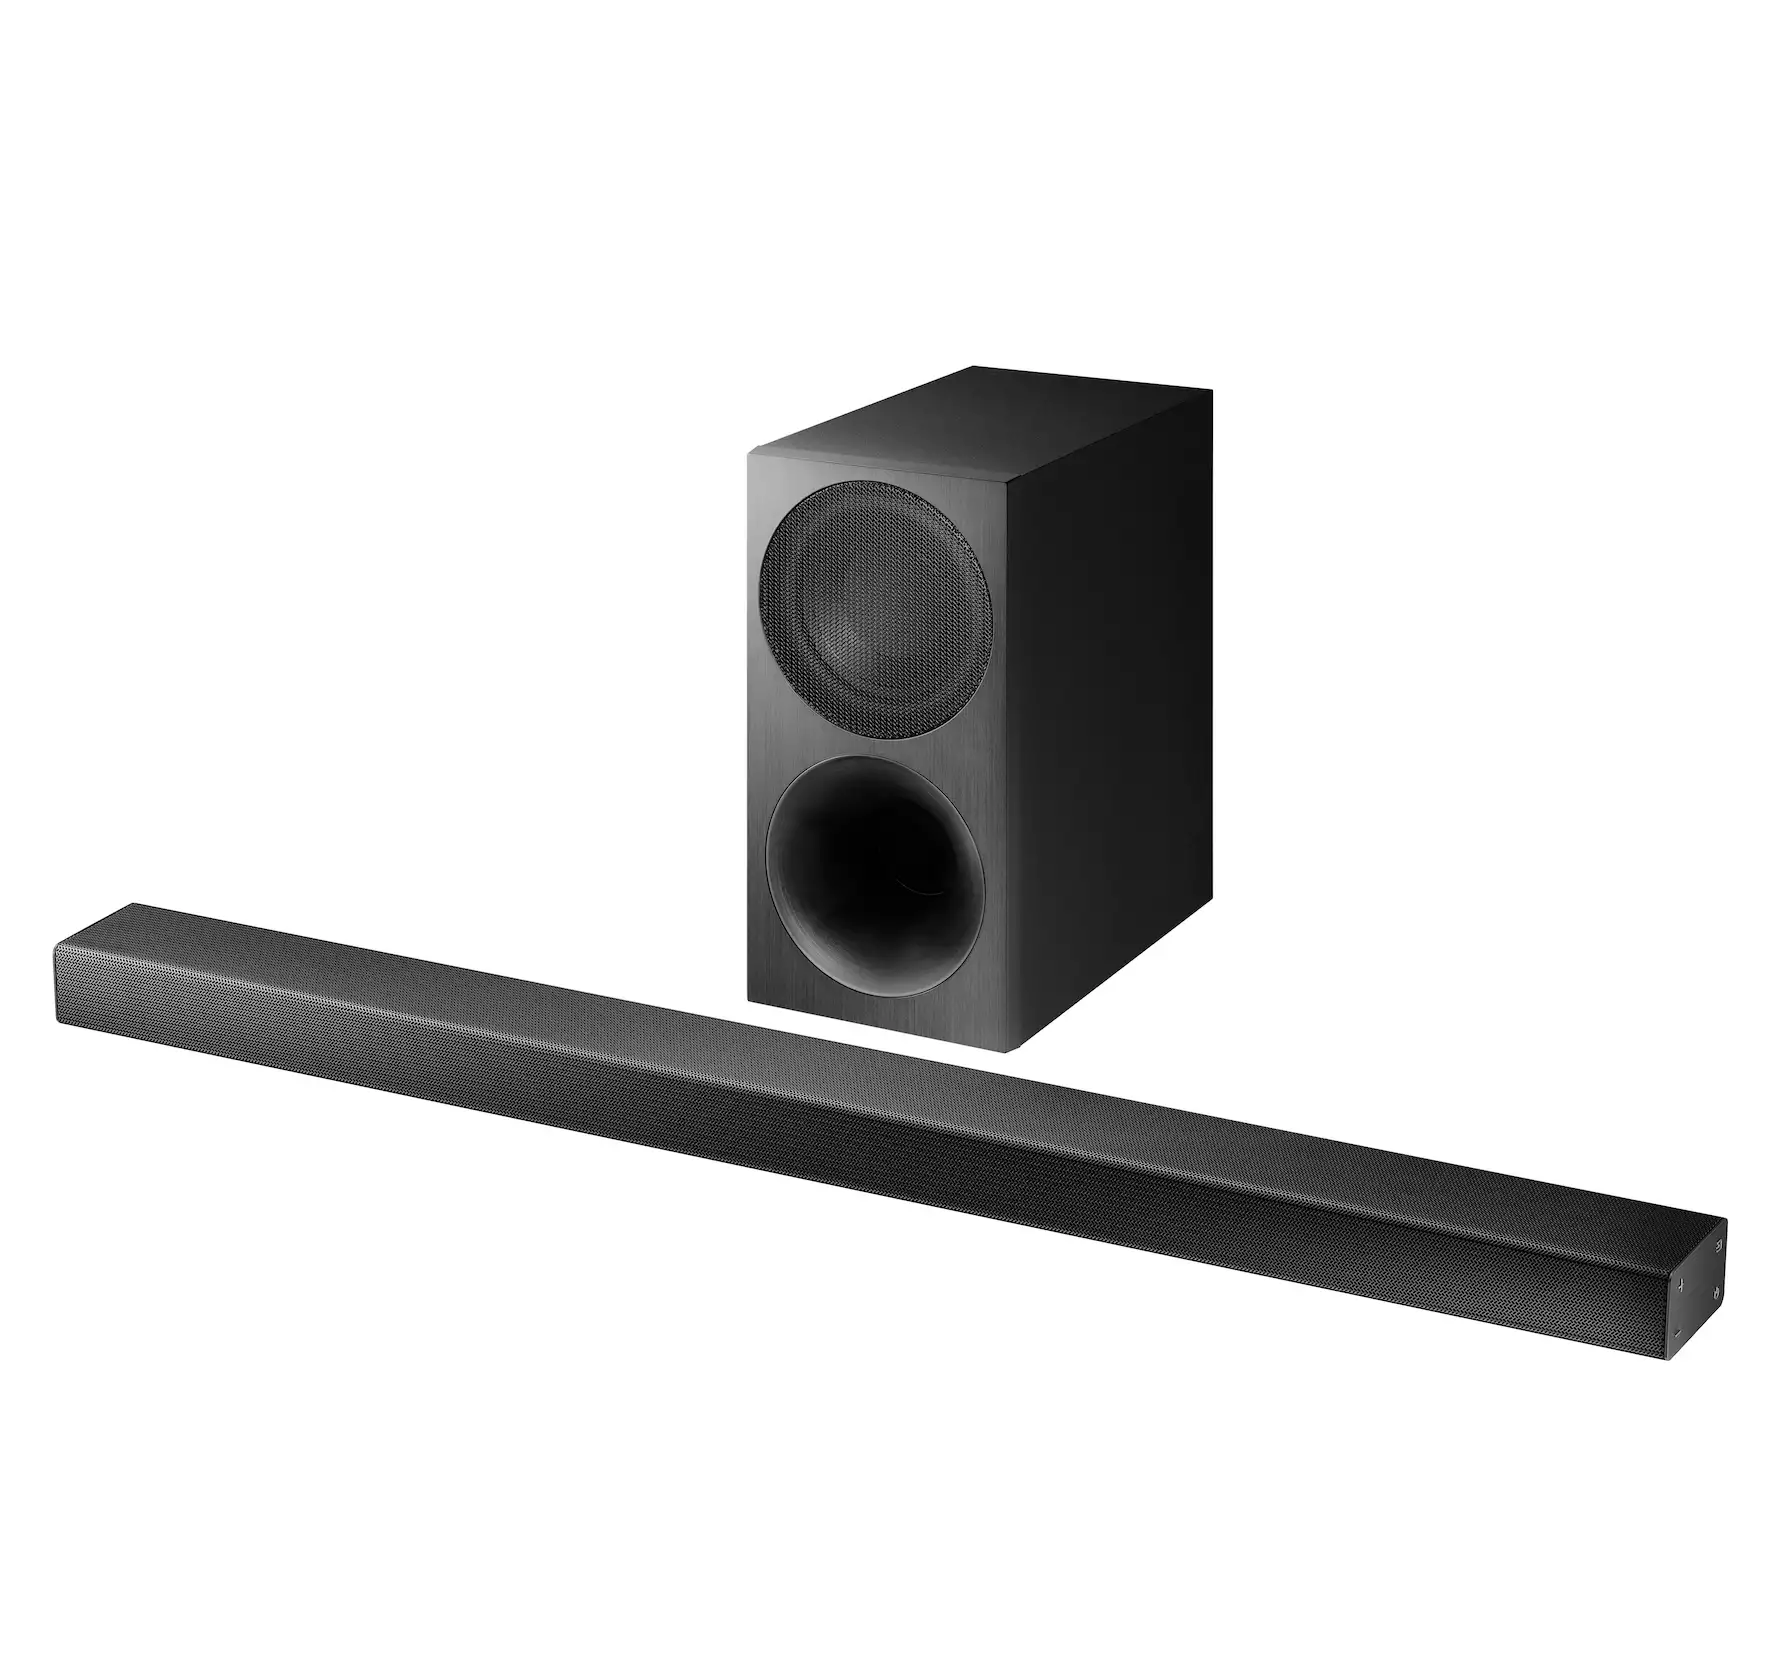 The number of channels is different: 2.1 Soundbar.